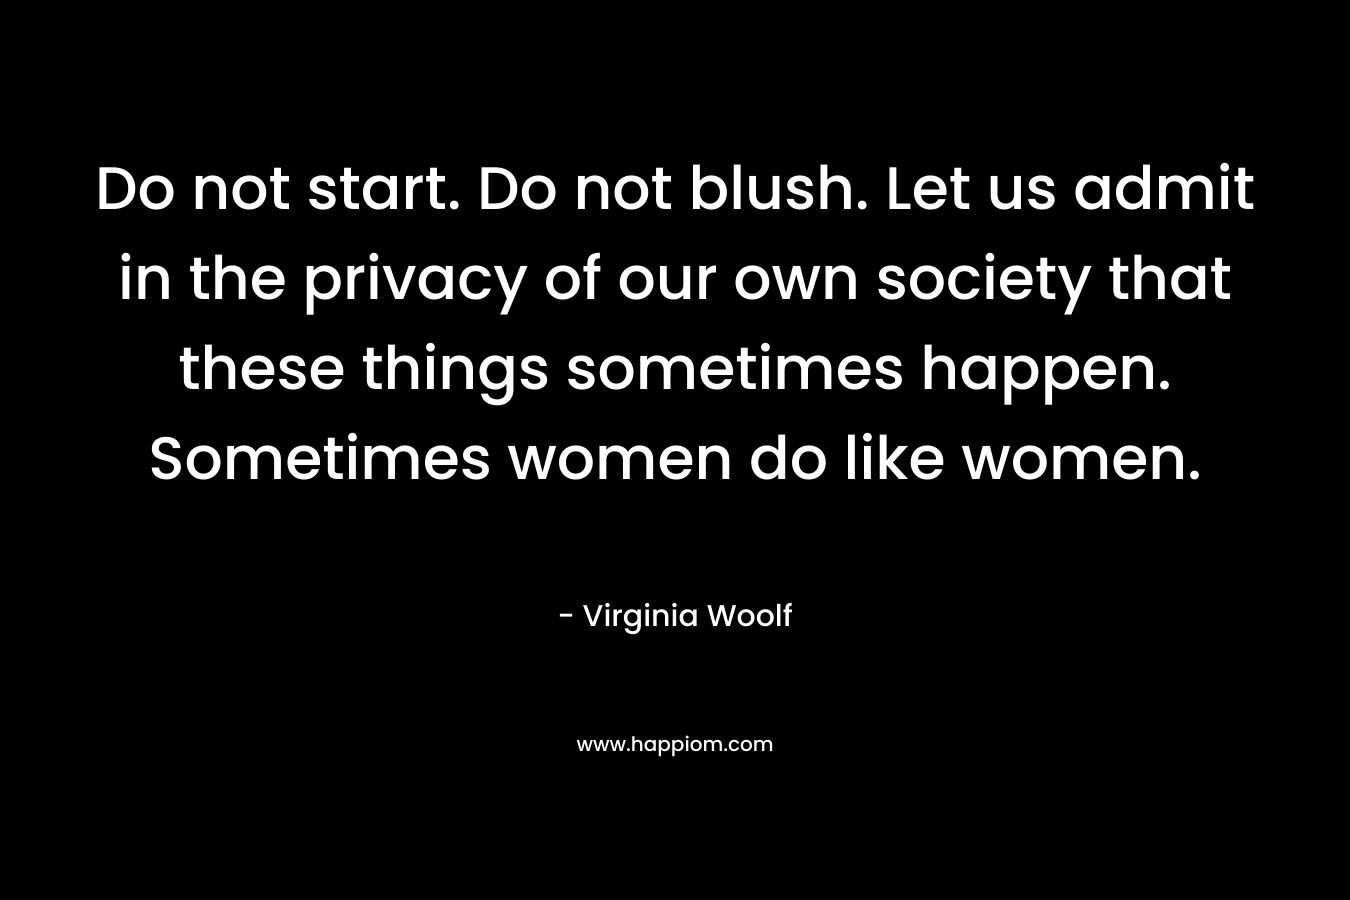 Do not start. Do not blush. Let us admit in the privacy of our own society that these things sometimes happen. Sometimes women do like women. – Virginia Woolf